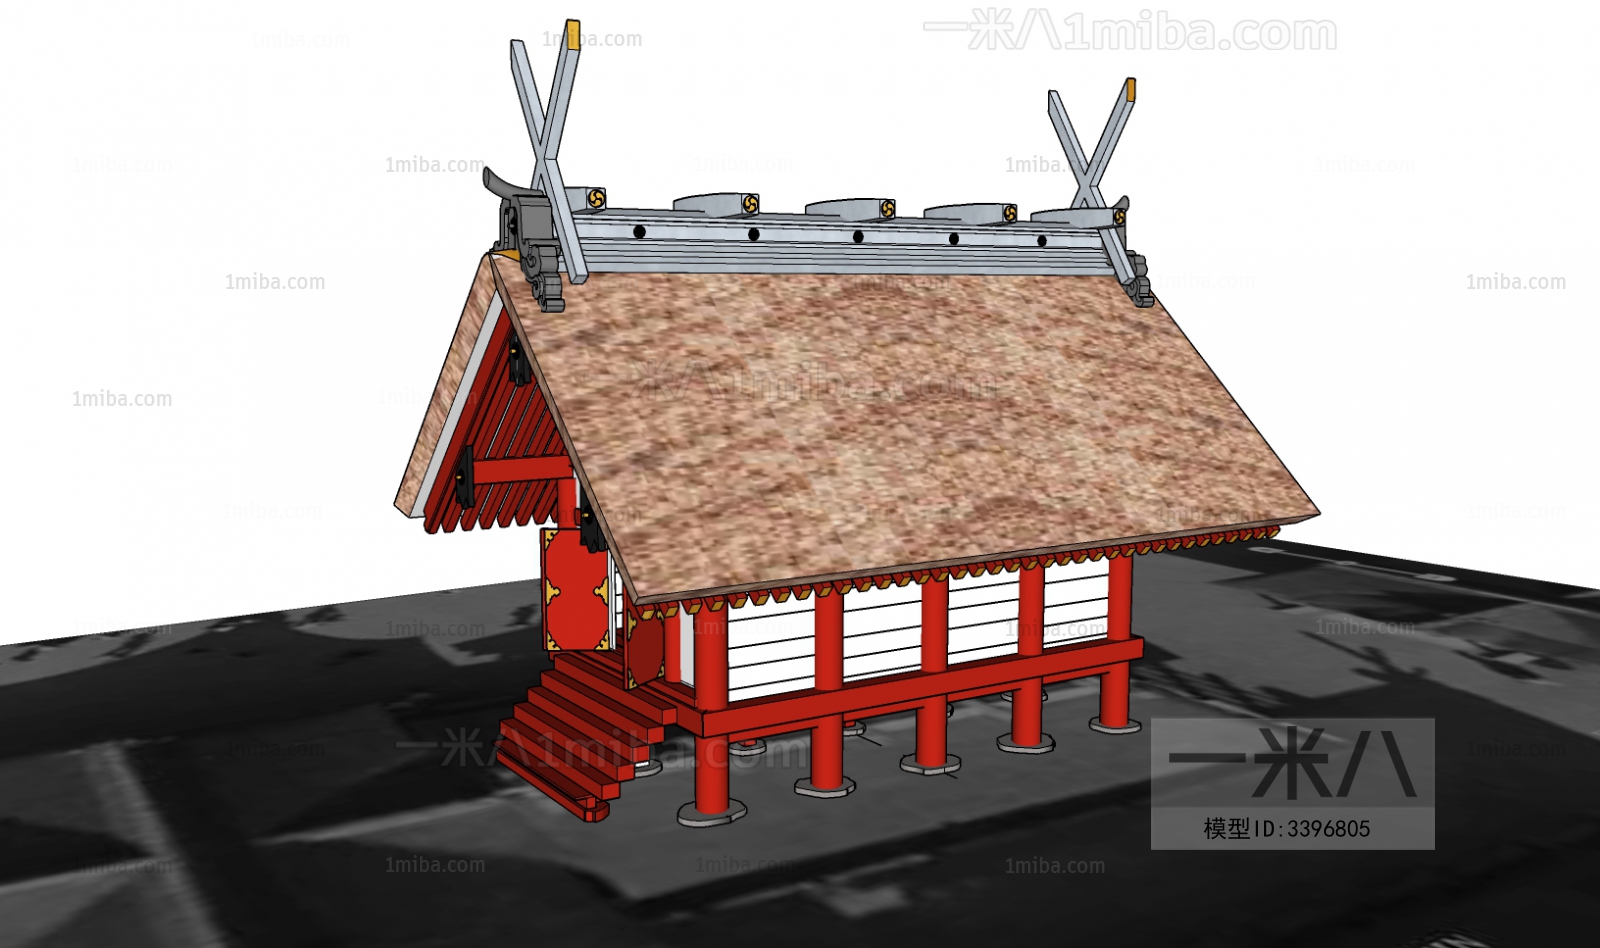 Japanese Style Ancient Architectural Buildings